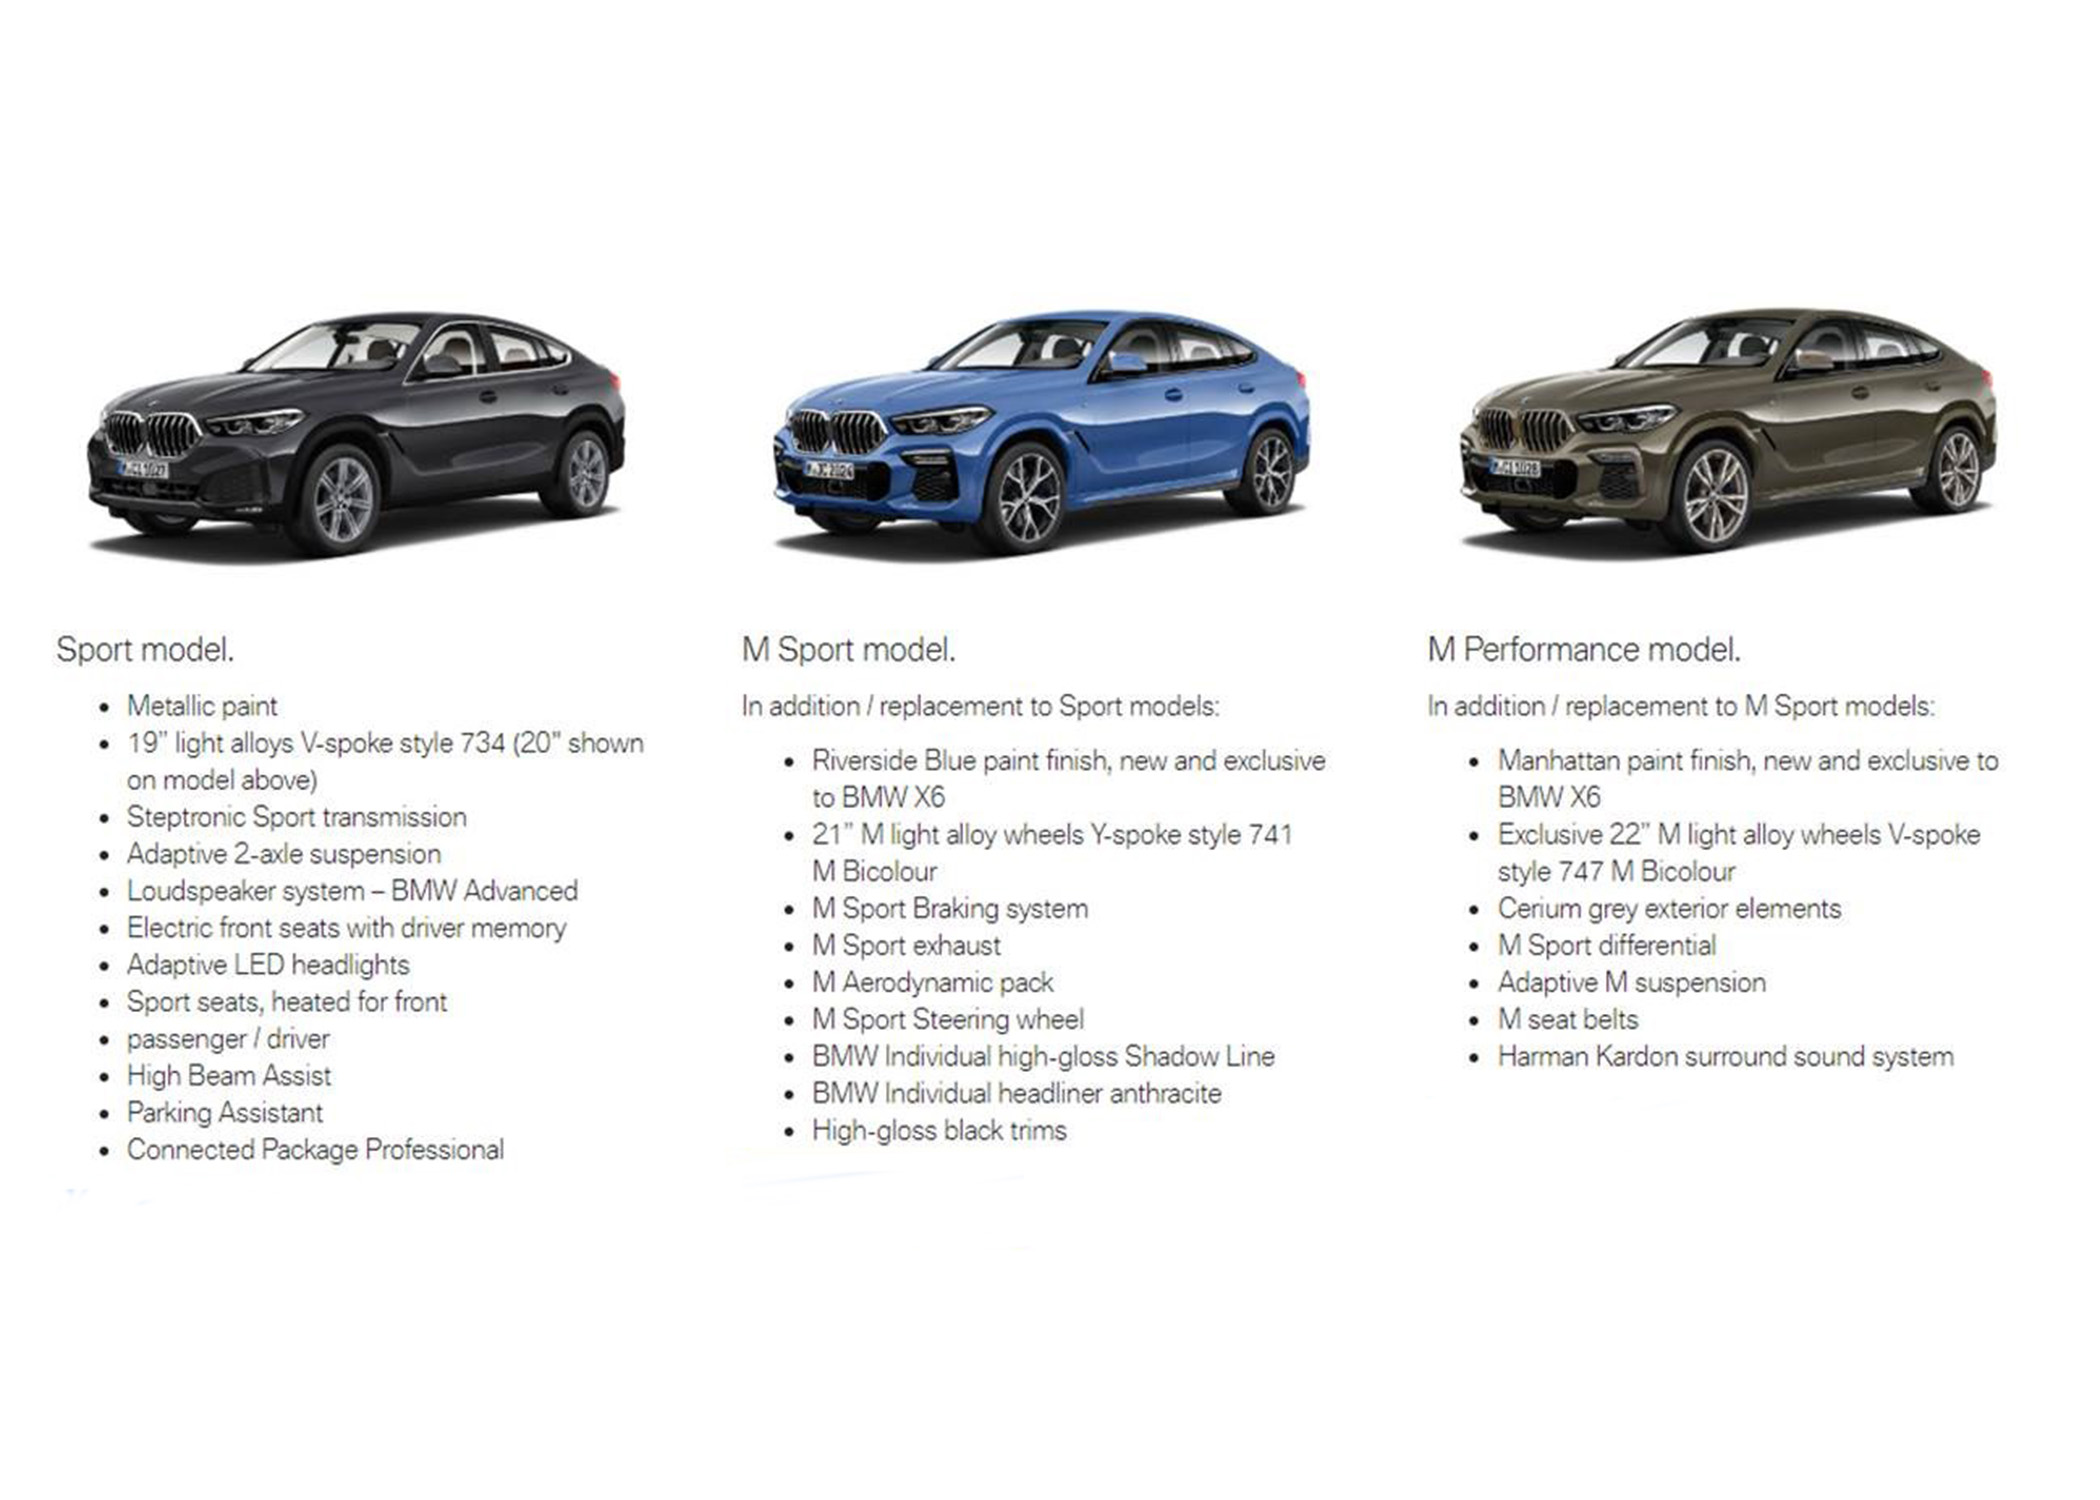 Standard Options for the new BMW X6